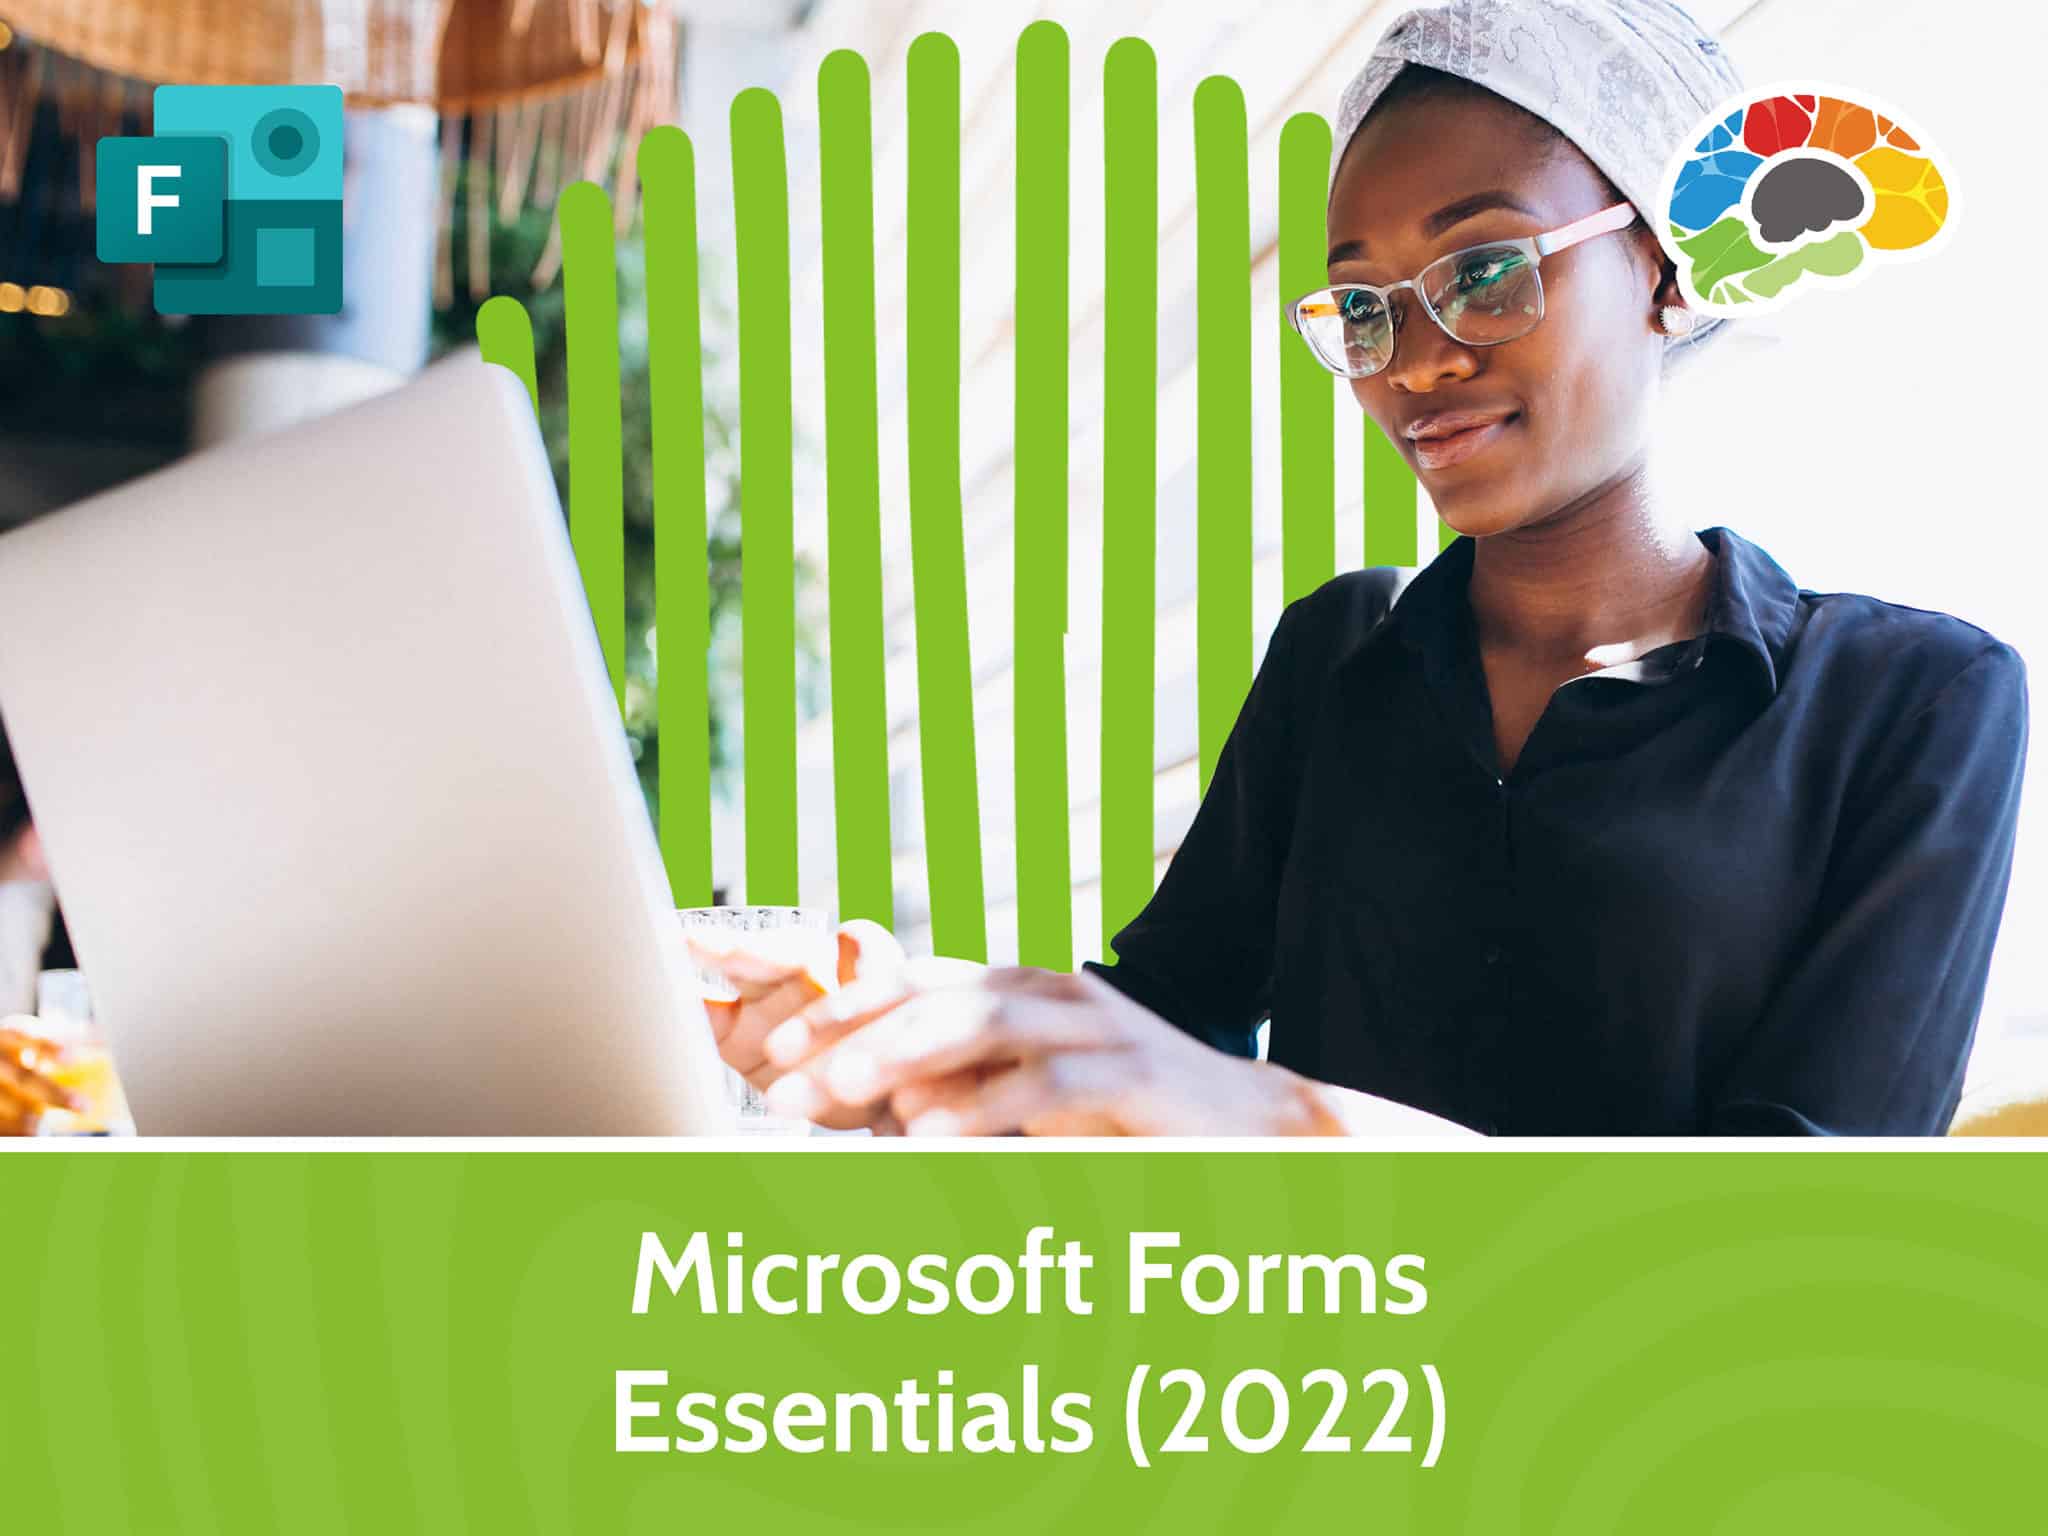 Microsoft Forms Essentials 2022 scaled